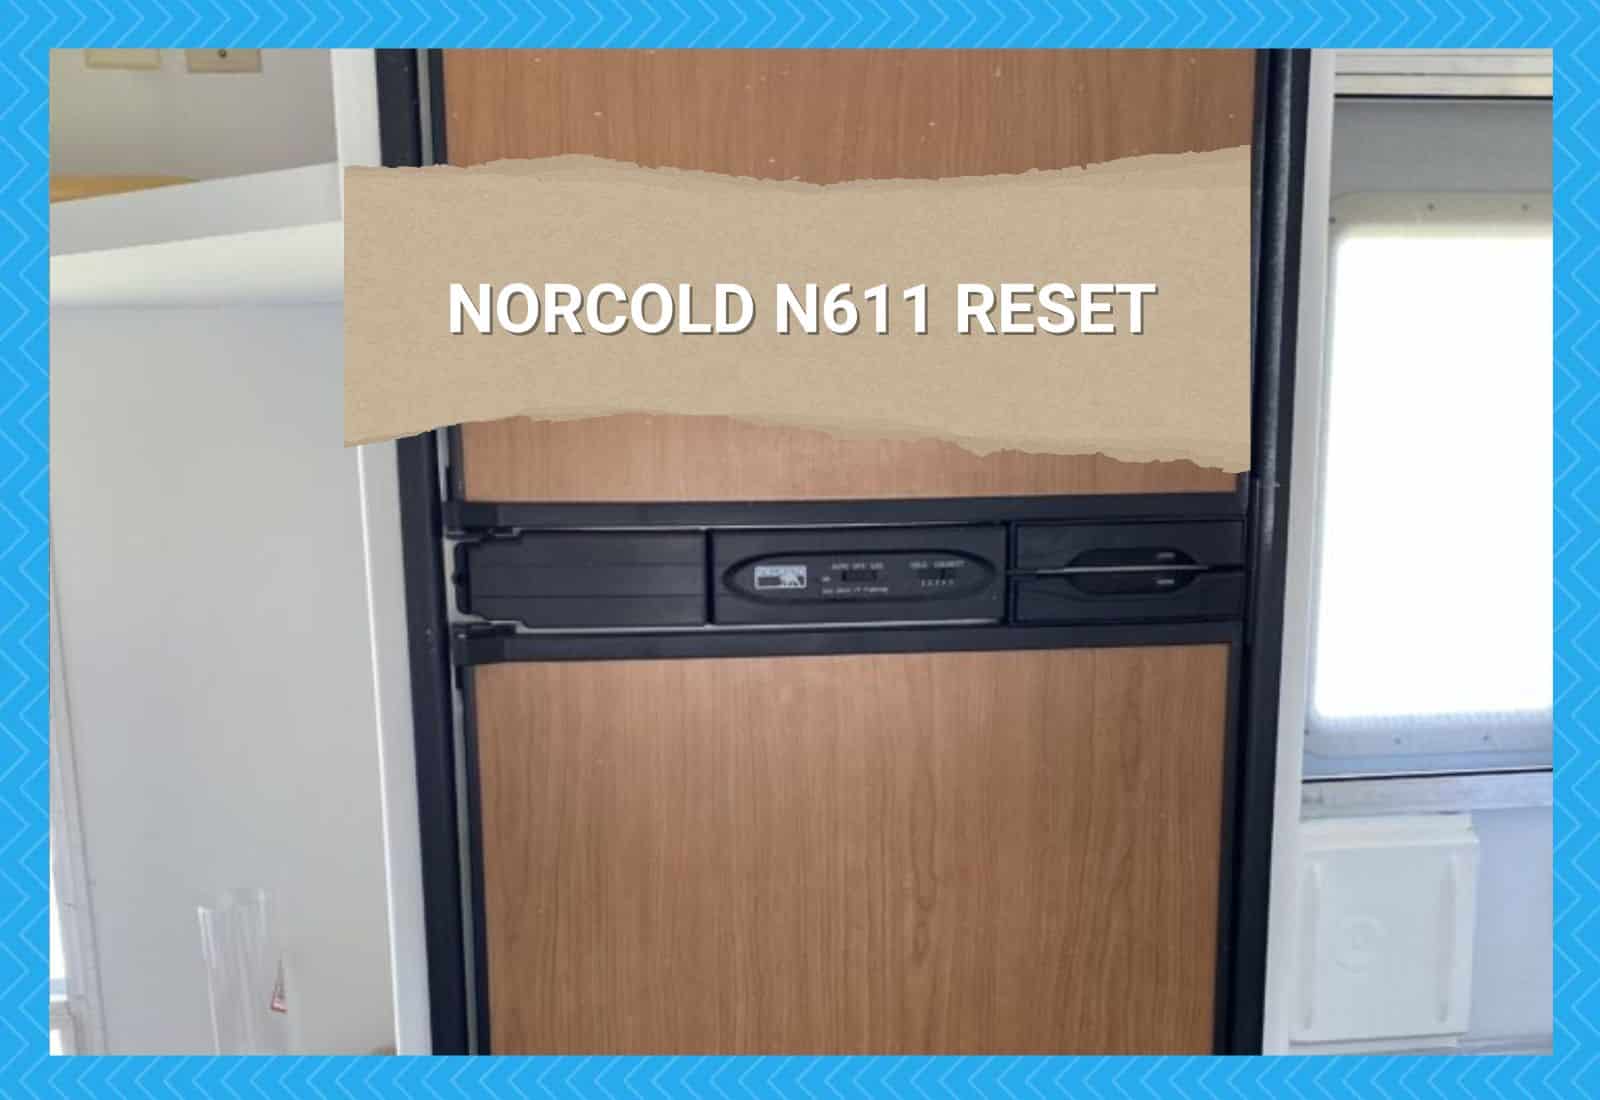 Norcold N611 Reset